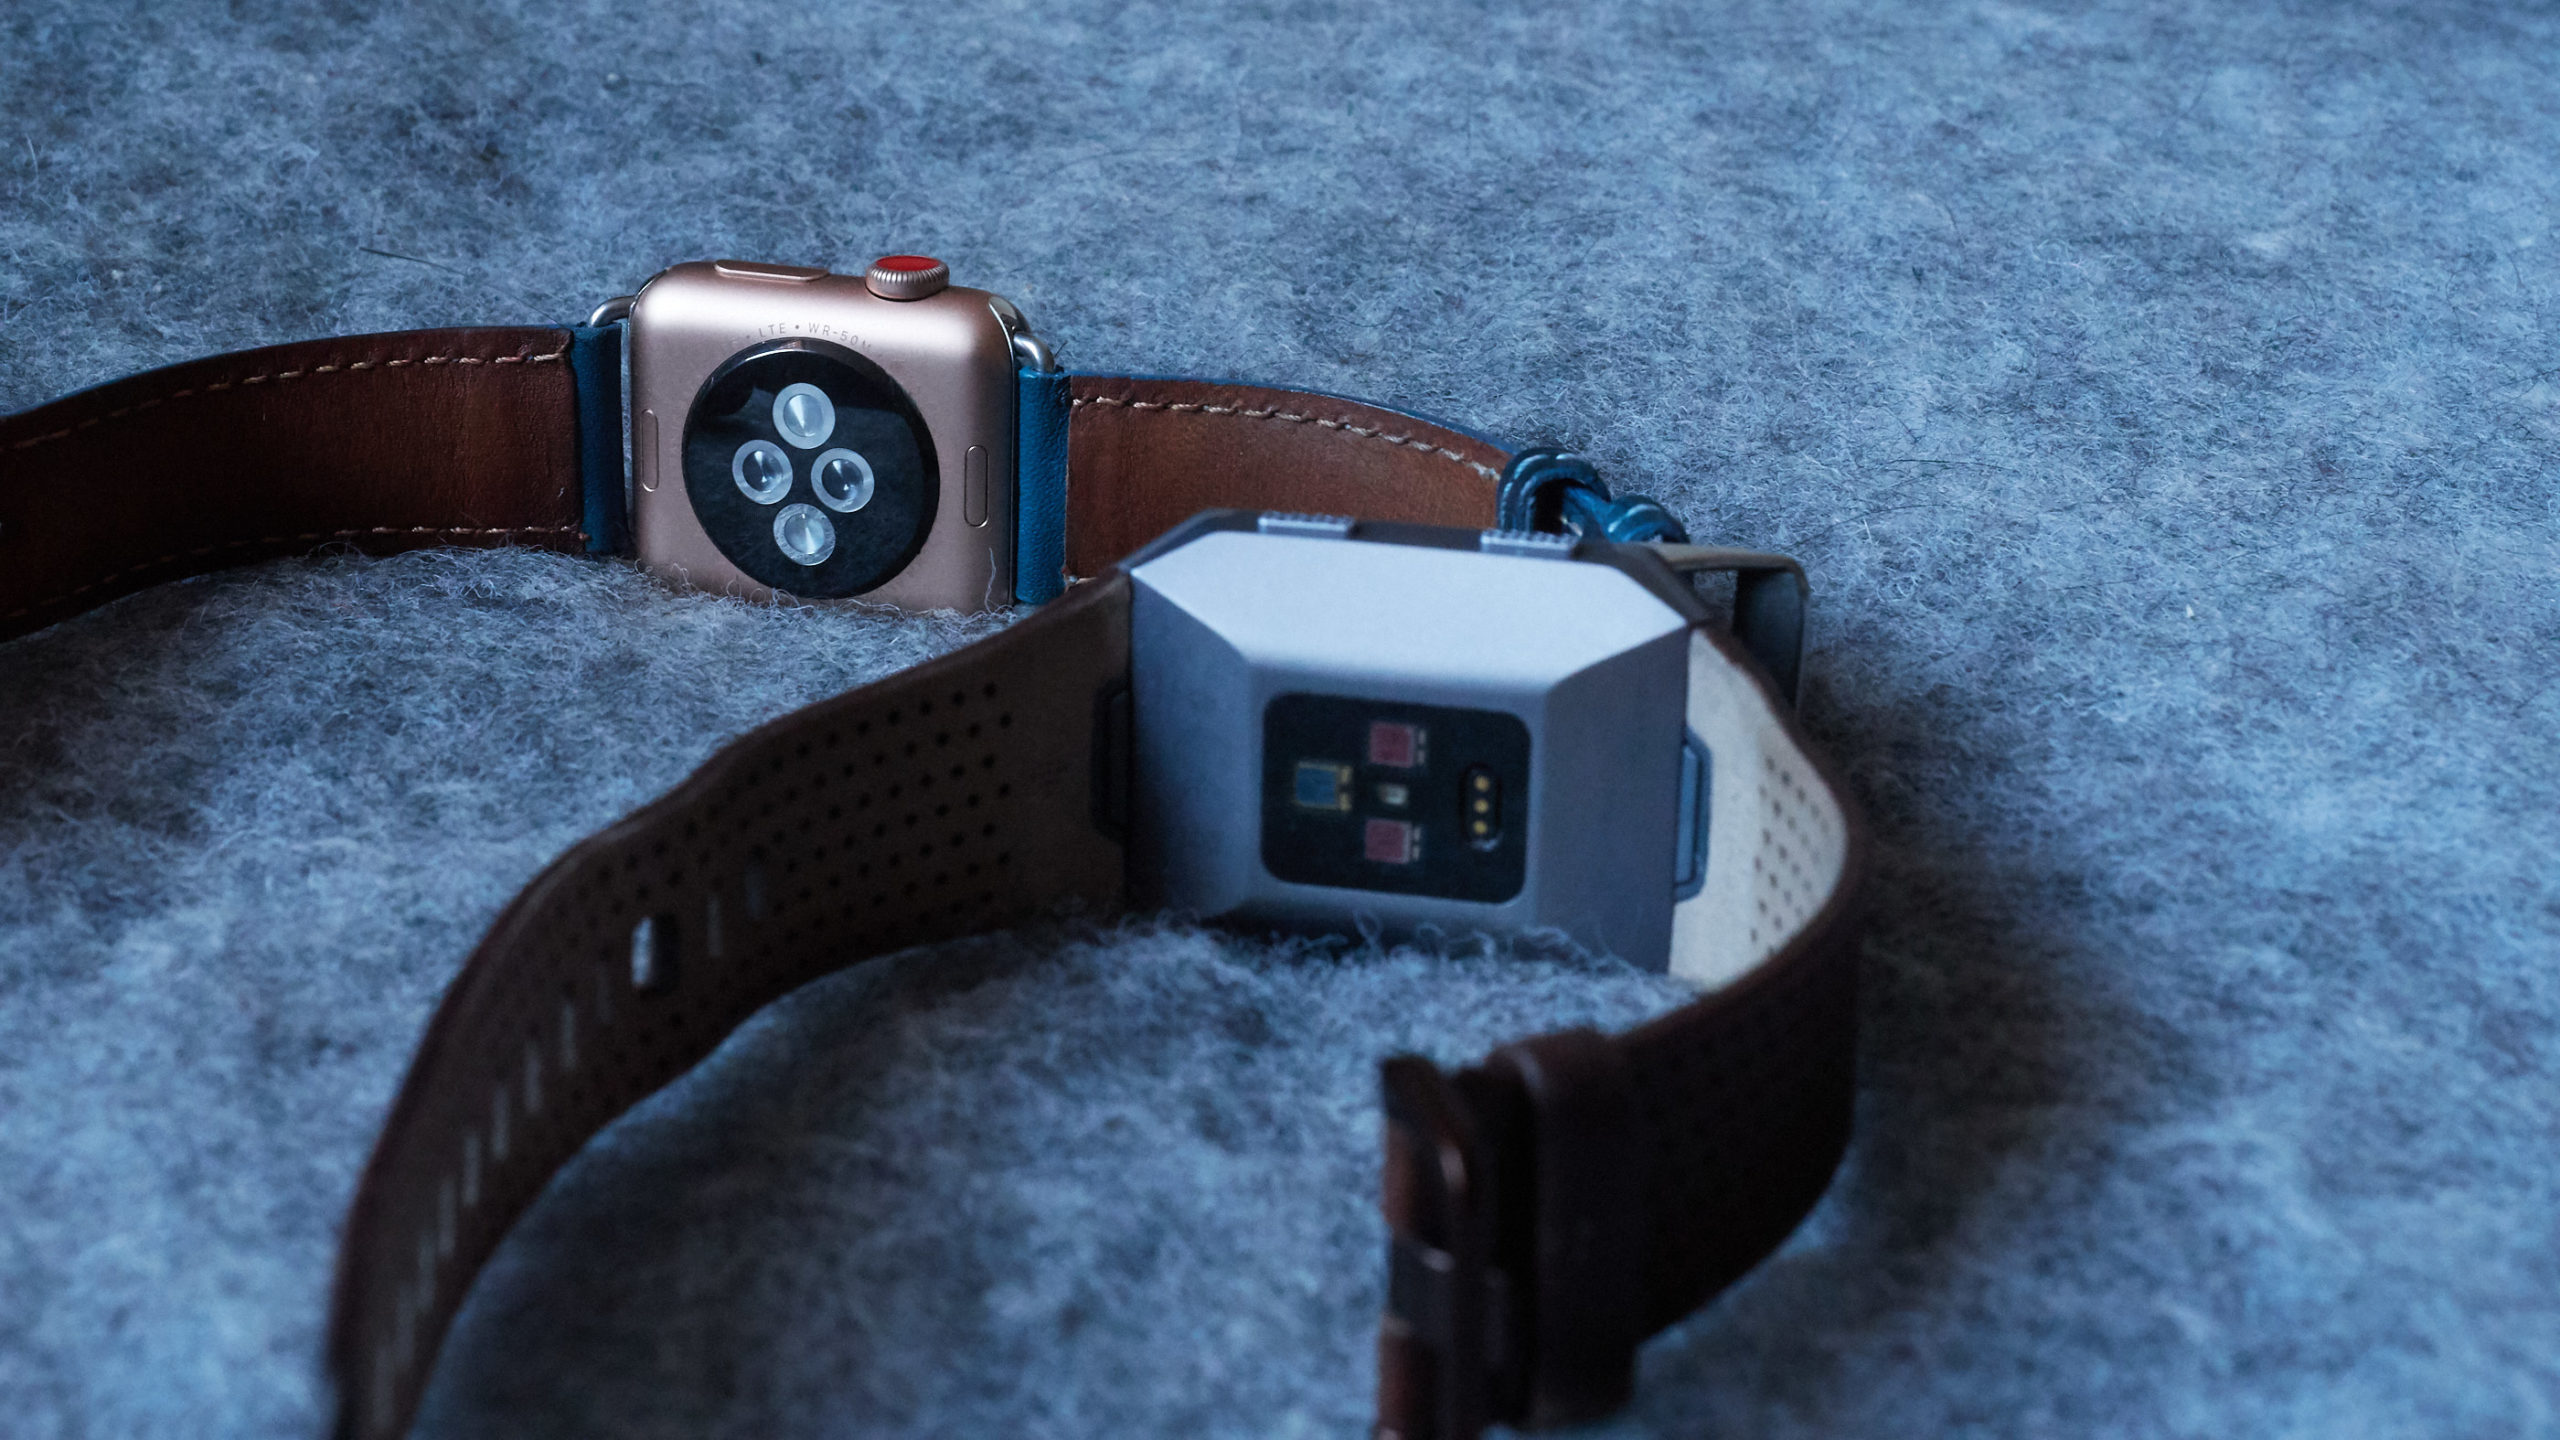 Apple Watch Vs. Fitbit Ionic: What’s The Best Smartwatch For You?